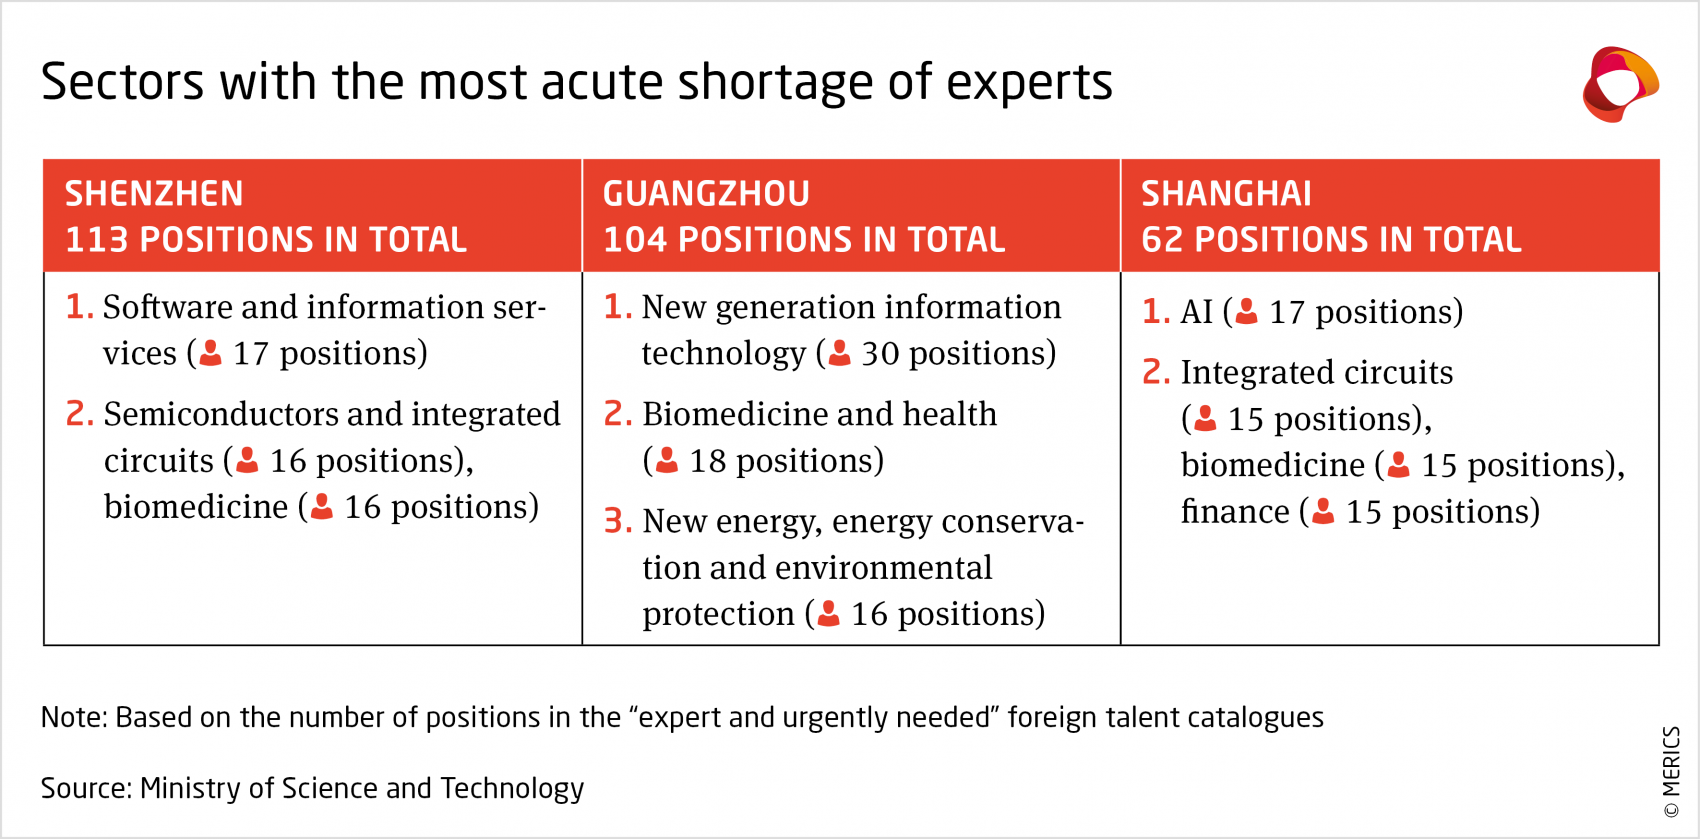 Sectors with the most acute shortage of experts